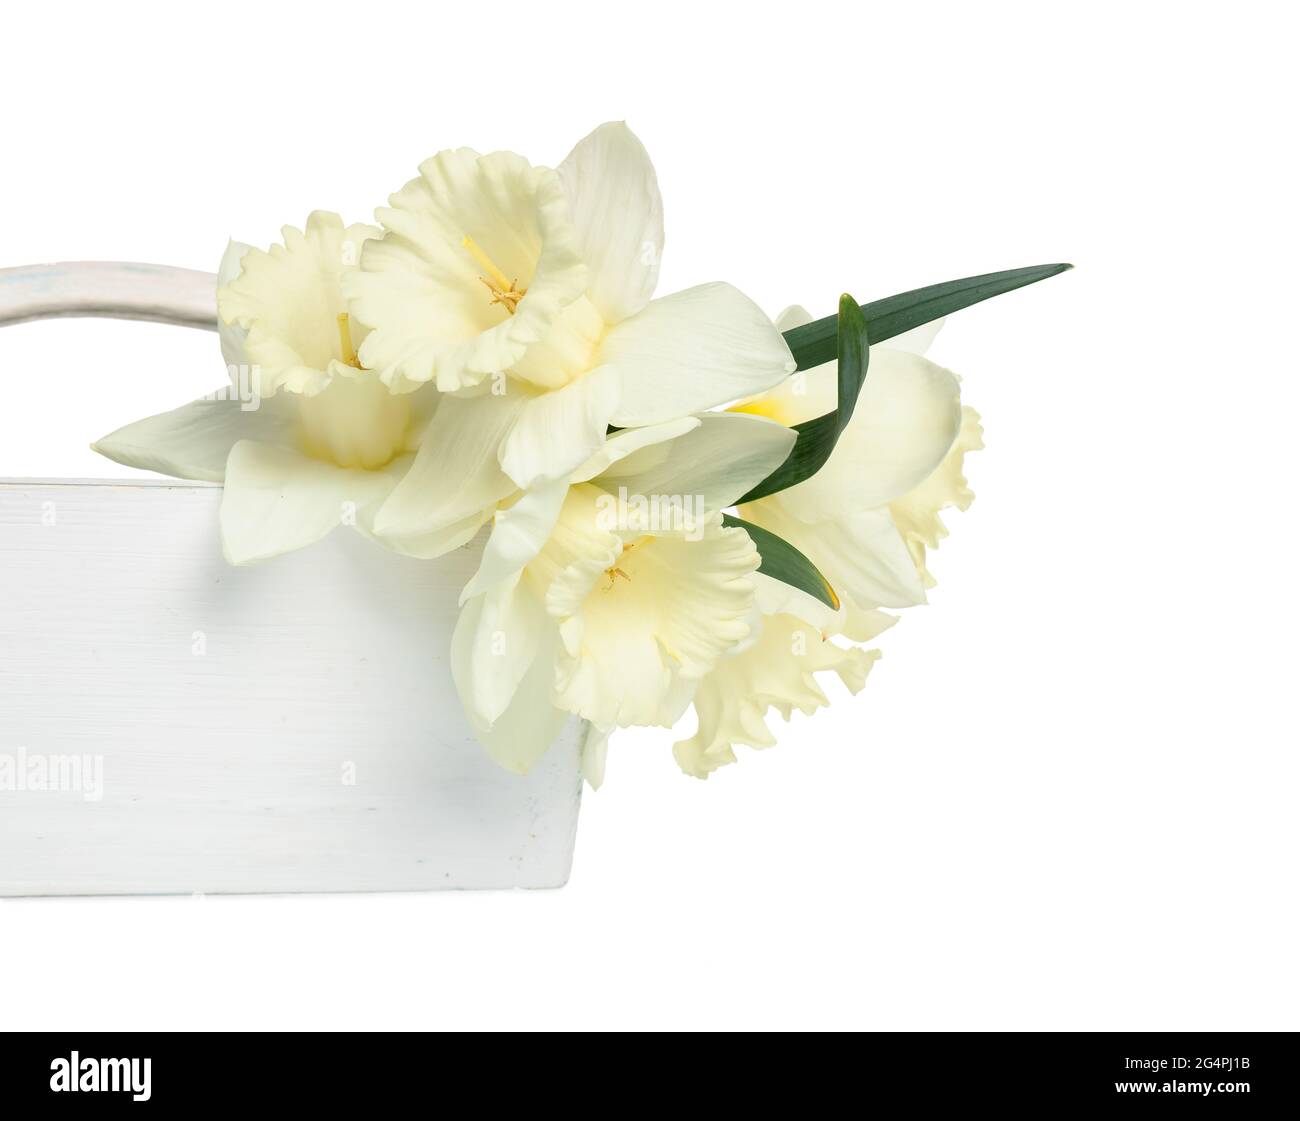 Bag with beautiful daffodils on white background Stock Photo - Alamy